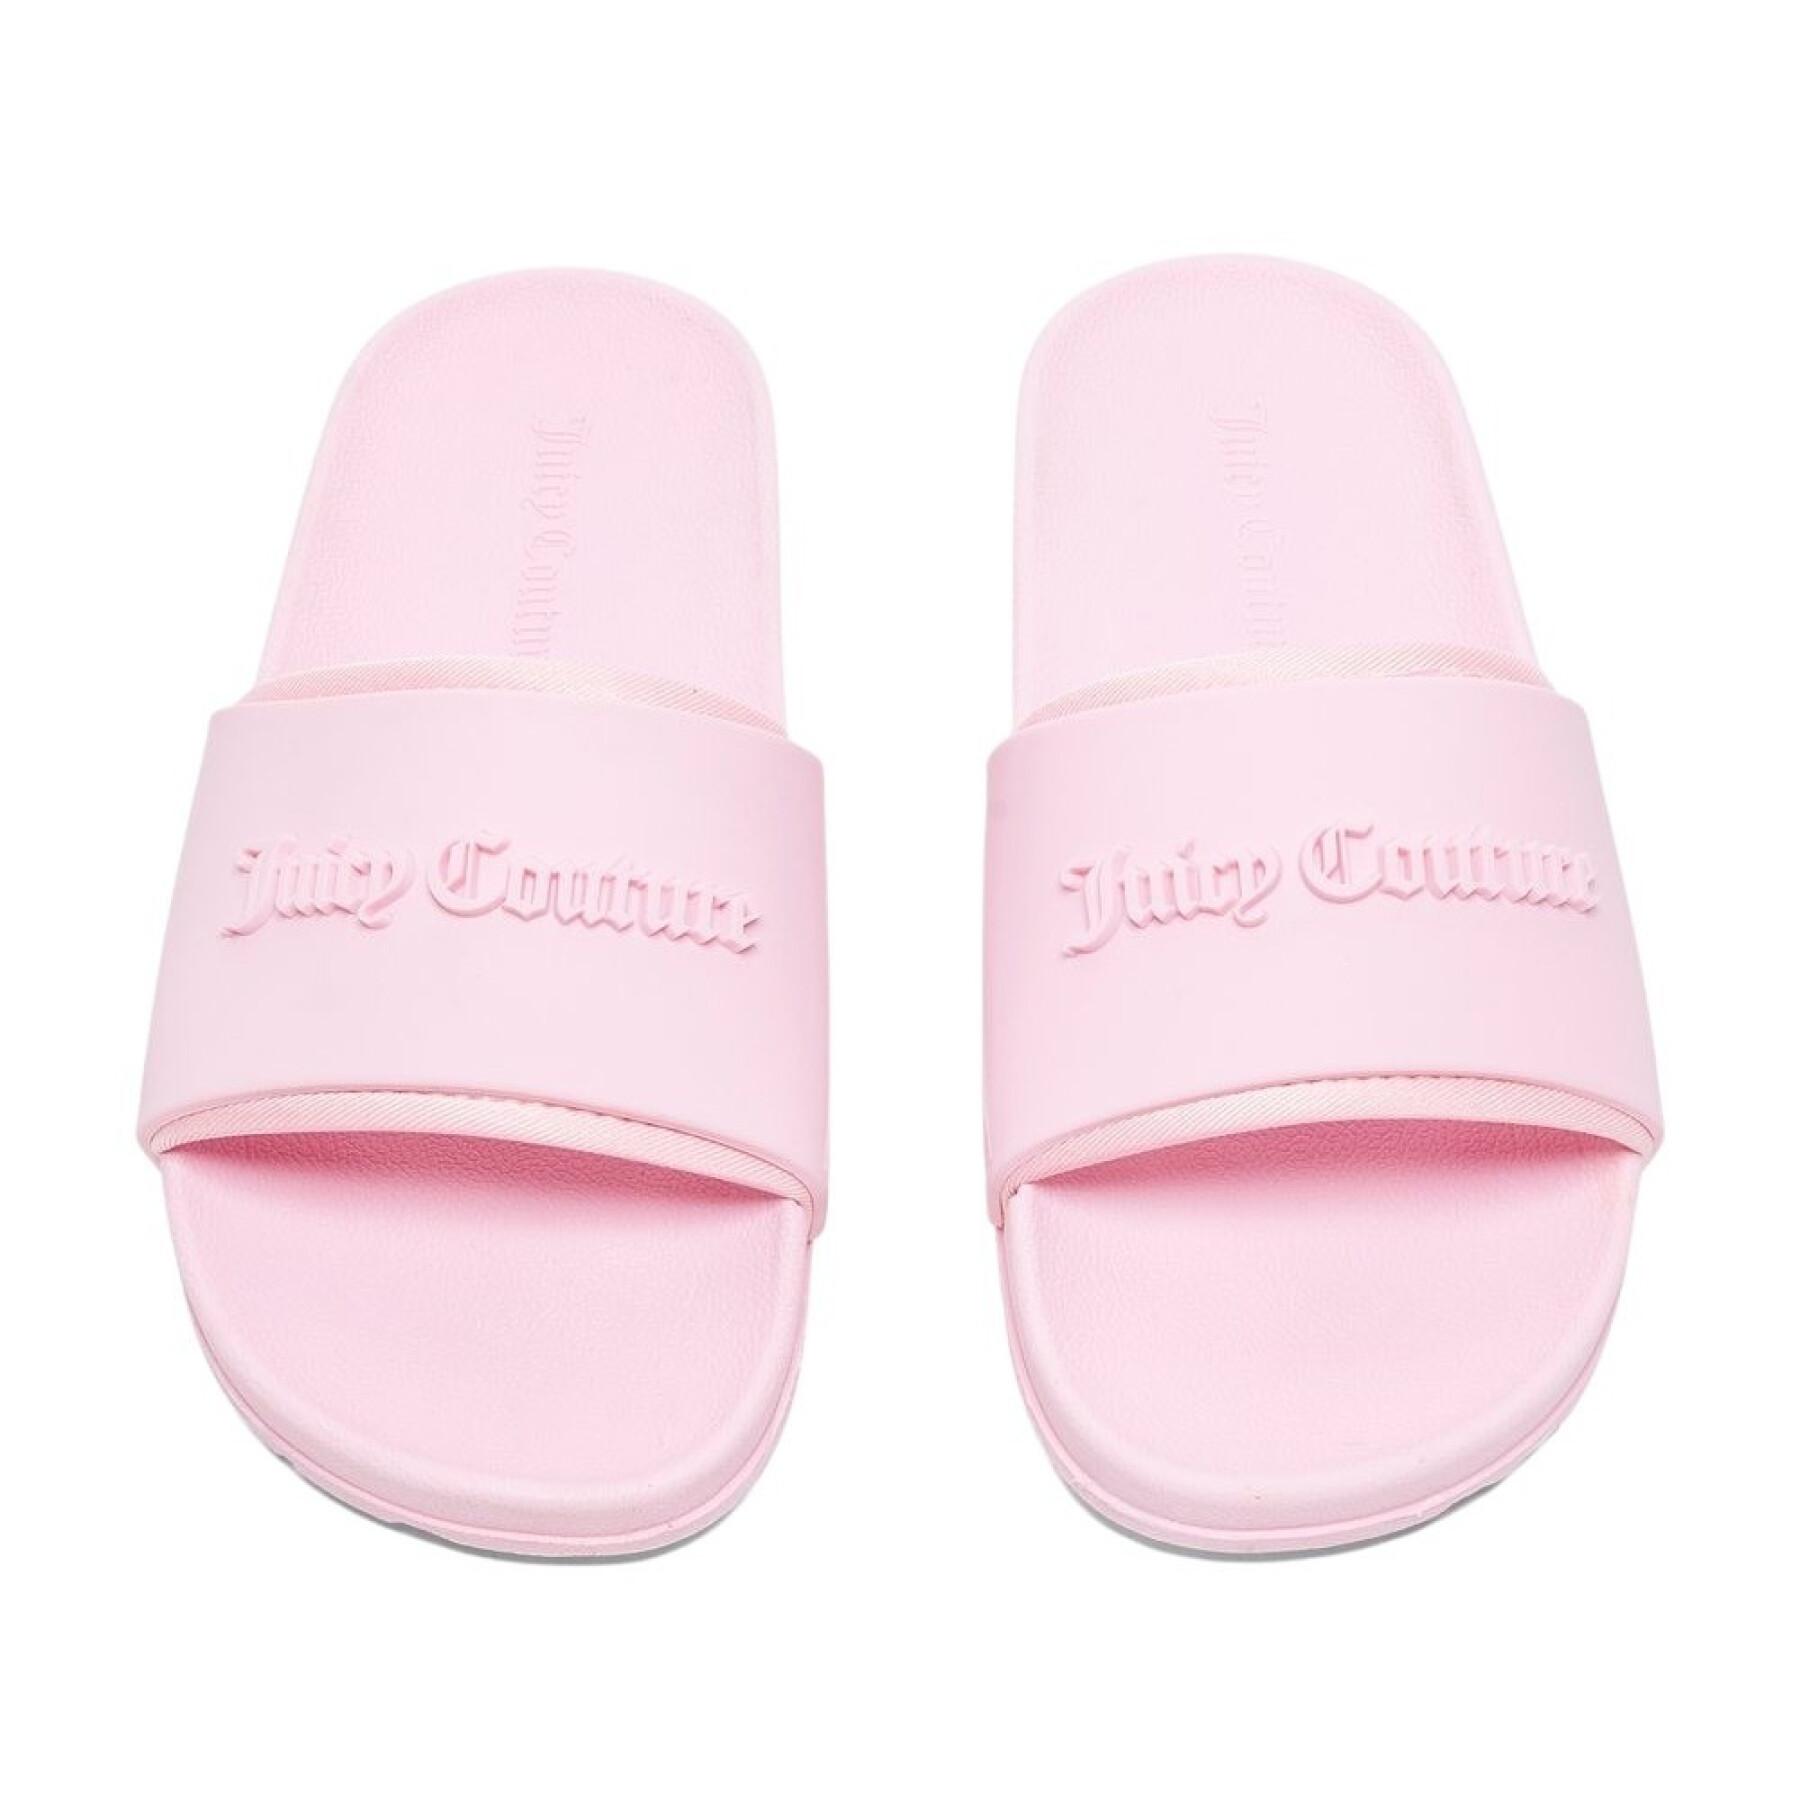 Chinelos de mulher Juicy Couture Embossed